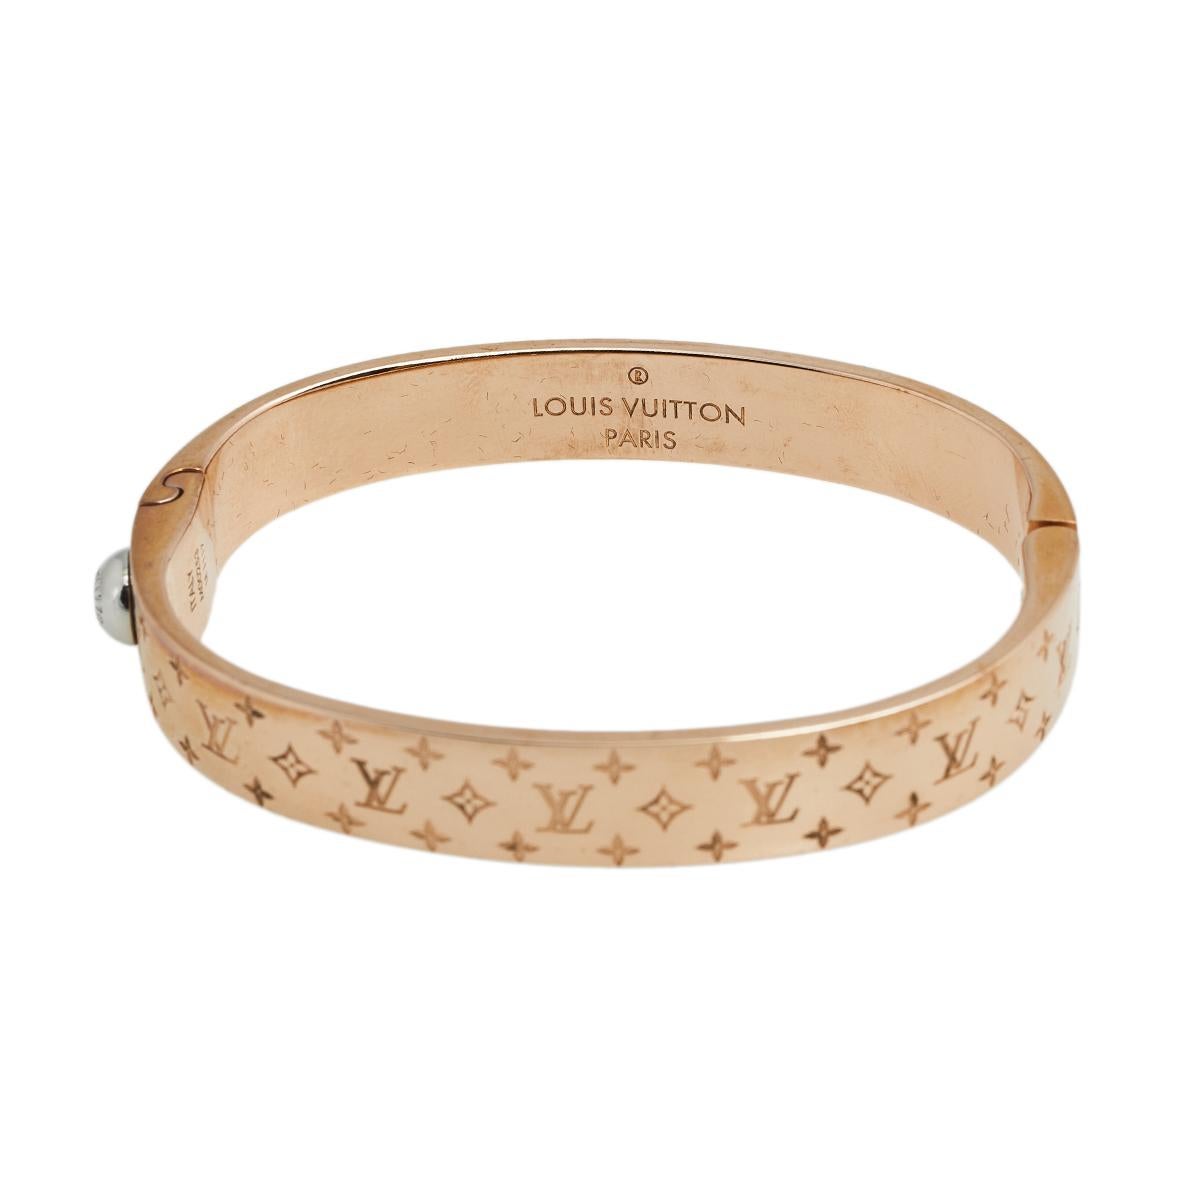 Bound to sit around your wrist and exude beauty, this Louis Vuitton is a great buy. It is made from rose gold-toned metal and engraved with the brand's signature monogram — a pattern well-known and loved by fashion lovers around the world. The